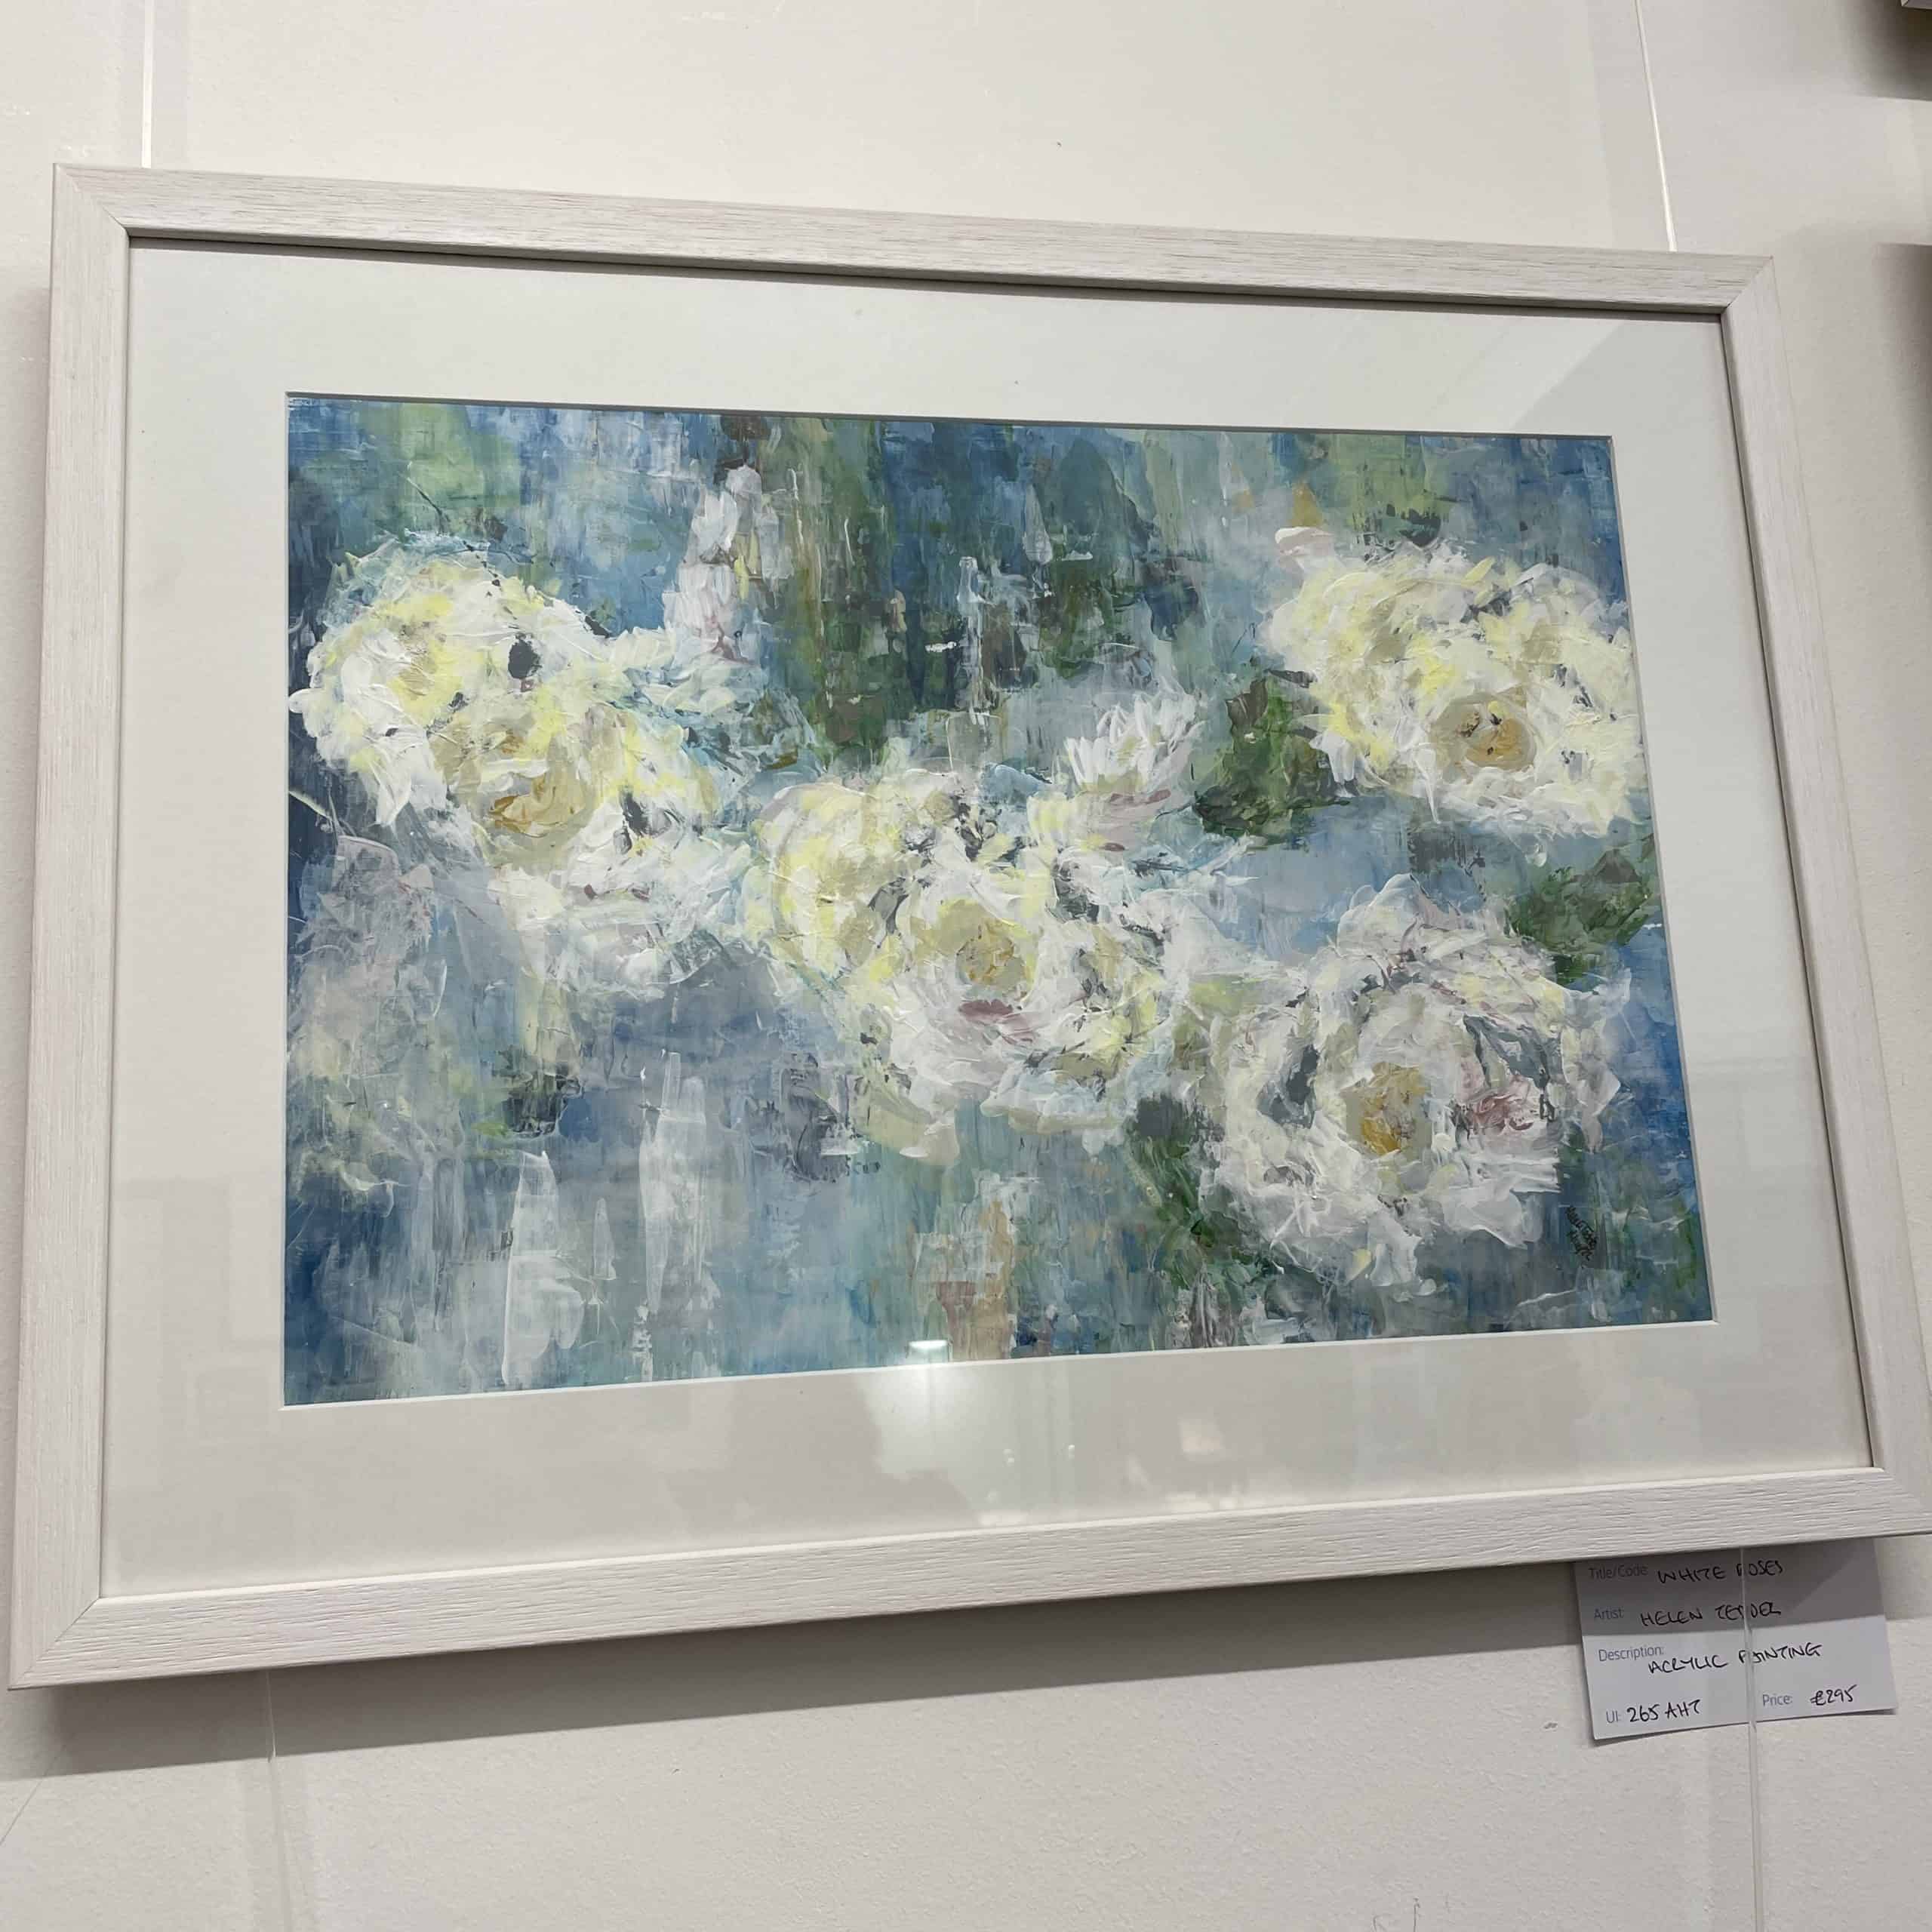 Floral Delights: an exhibition of Helen Tedder's acrylic paintings